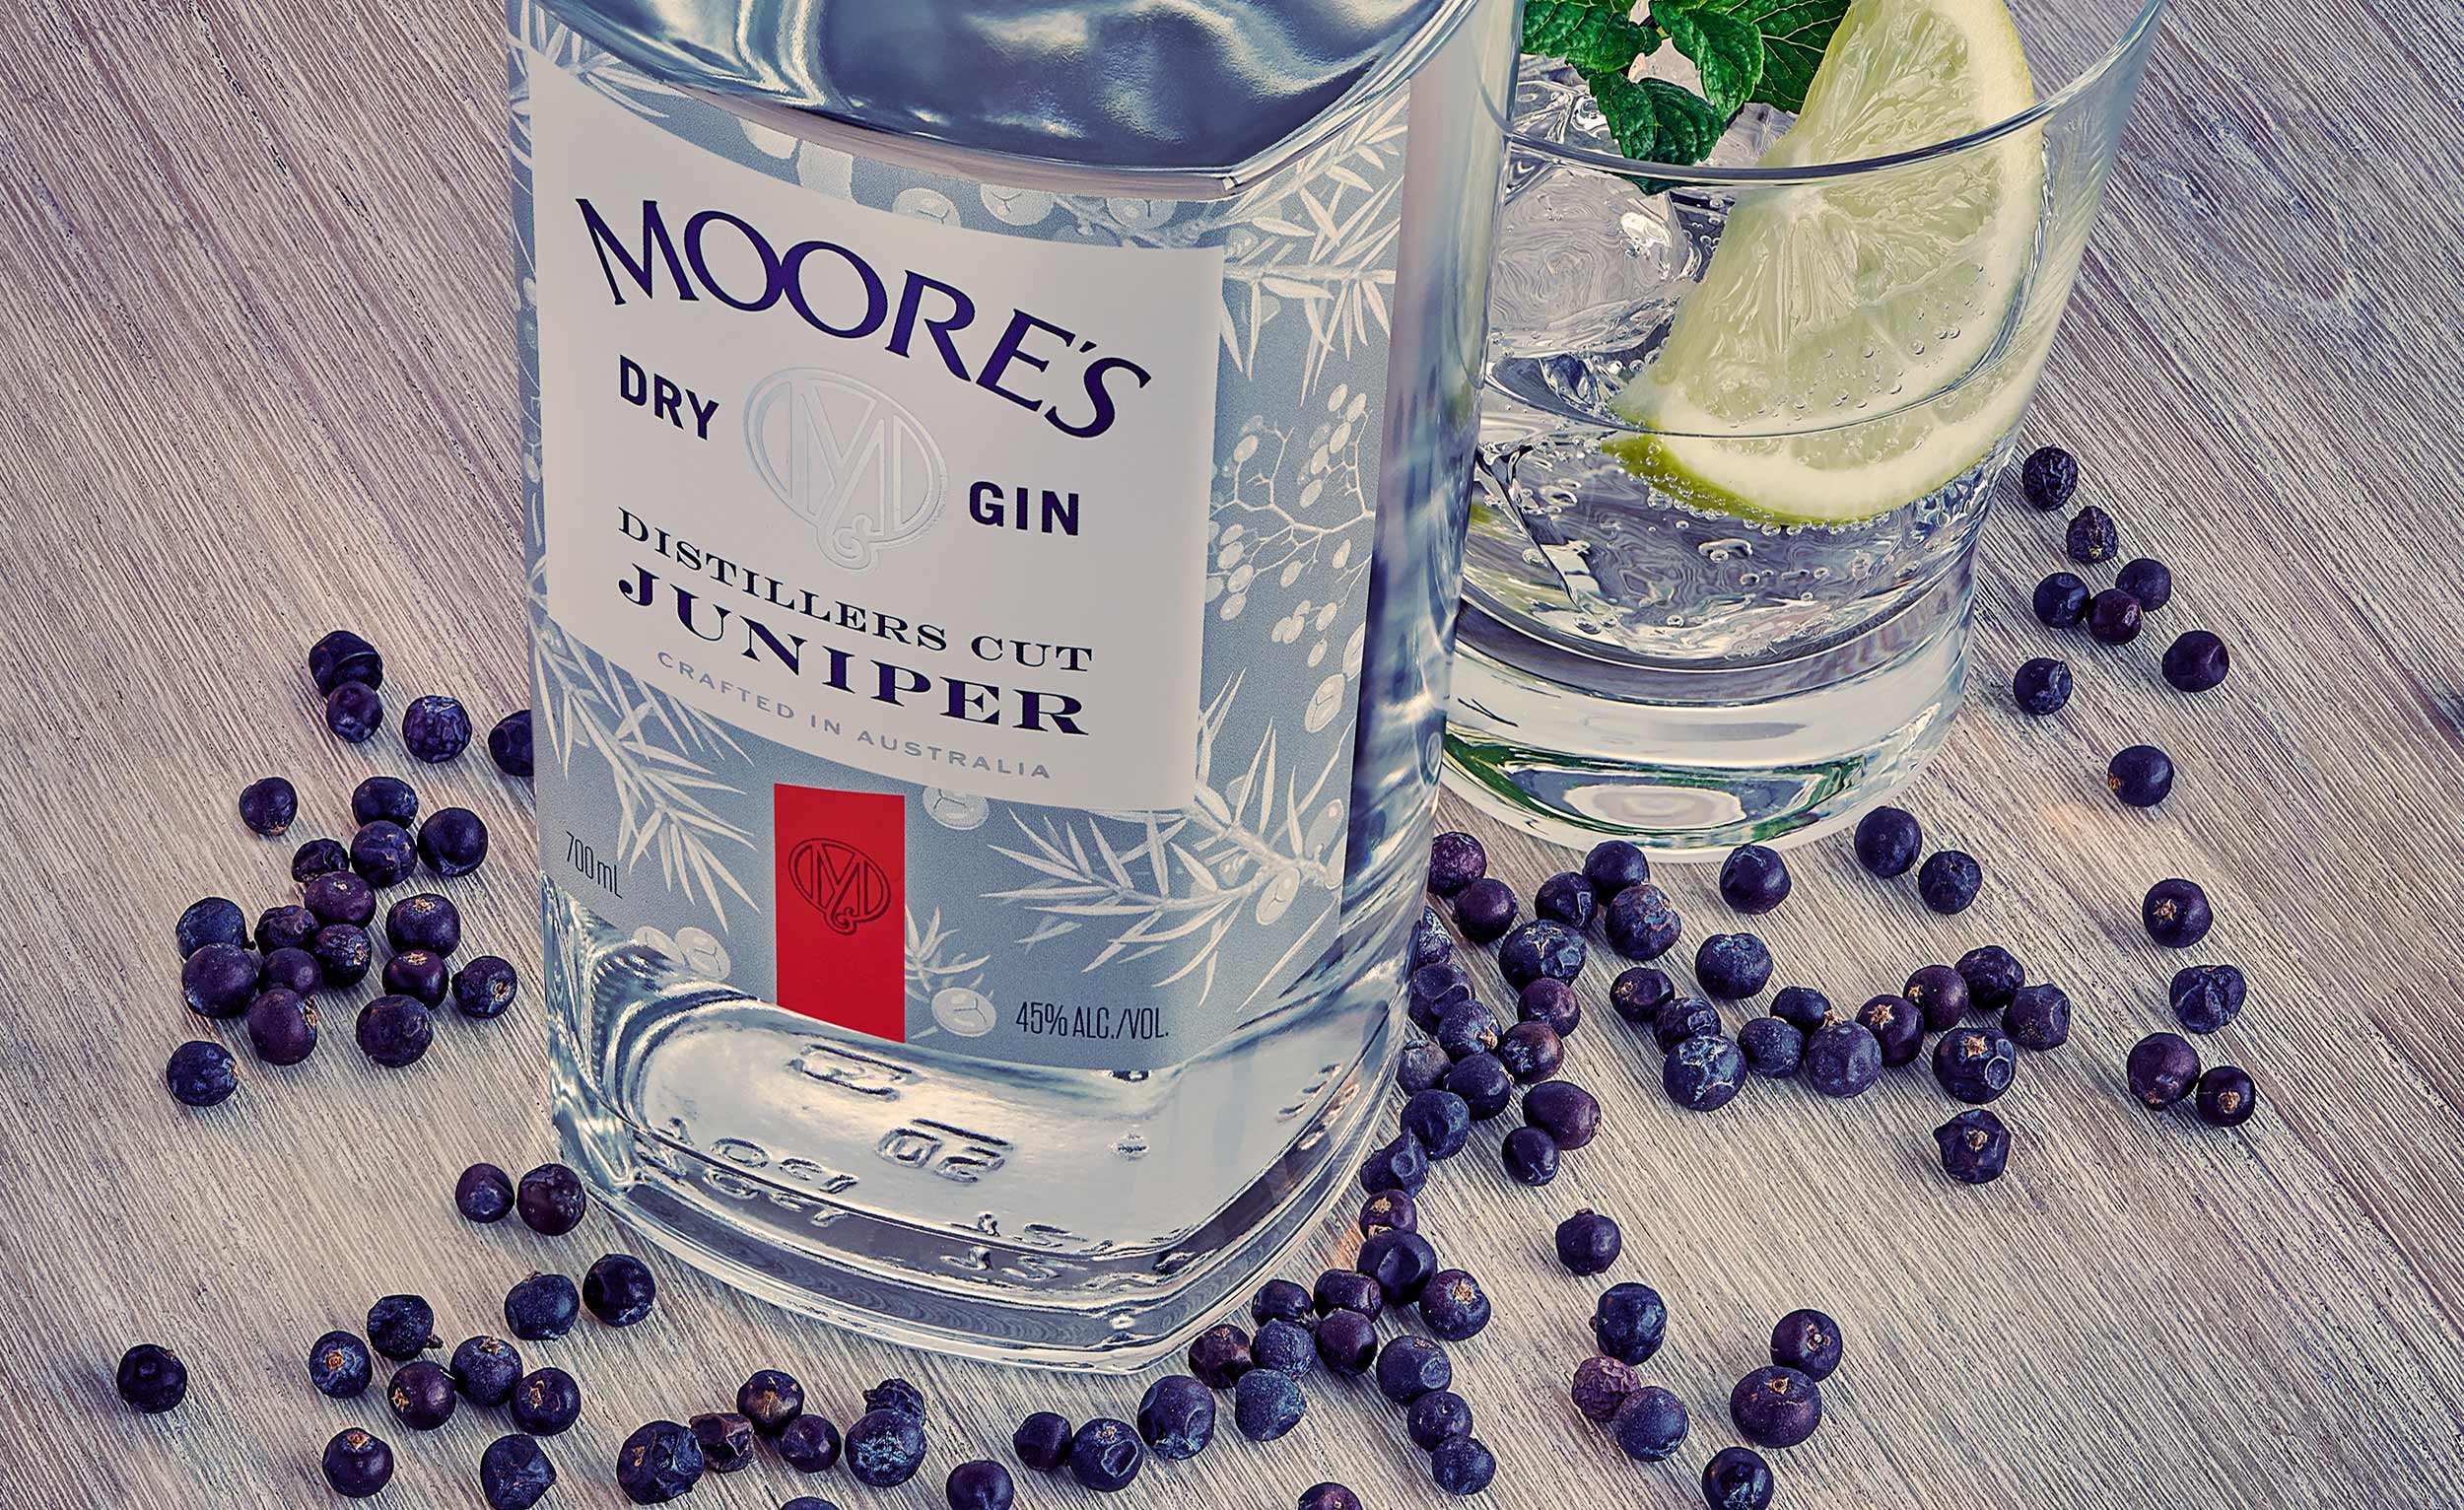 Moores Dry Gin